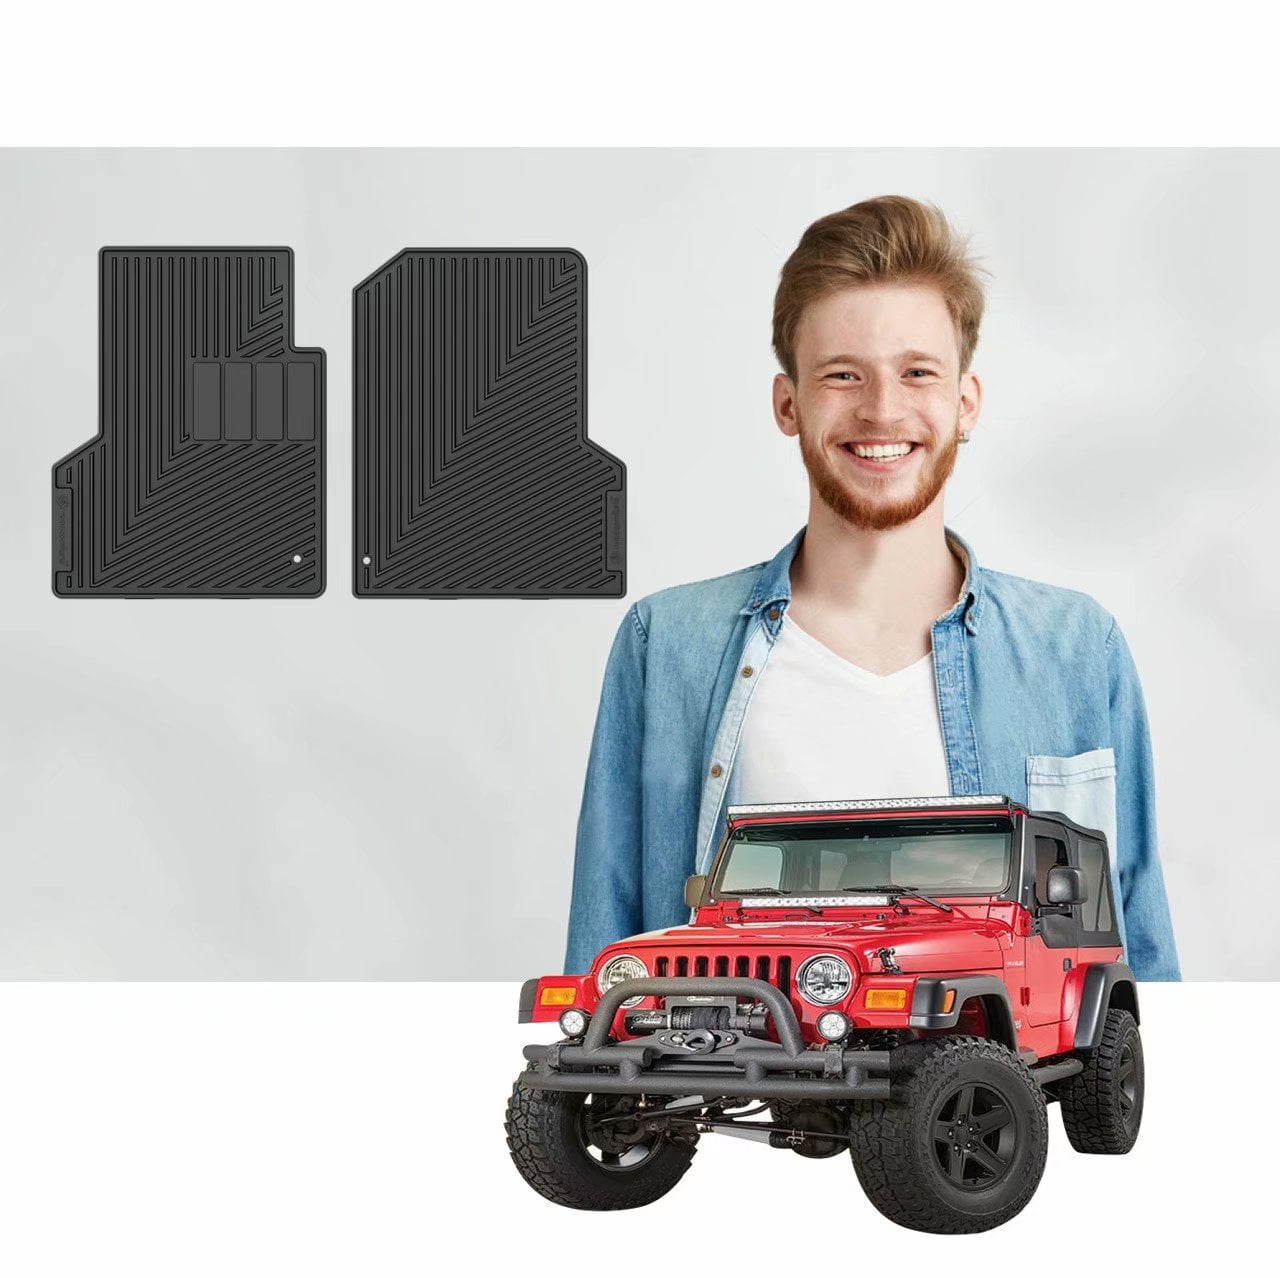 Road Comforts Custom Fit Jeep Wrangler 1996-2006 Car Floor Mats - Protect  Floor from Mud, Snow, Slush & Water - Front Row Only (2pcs) (Black) -  